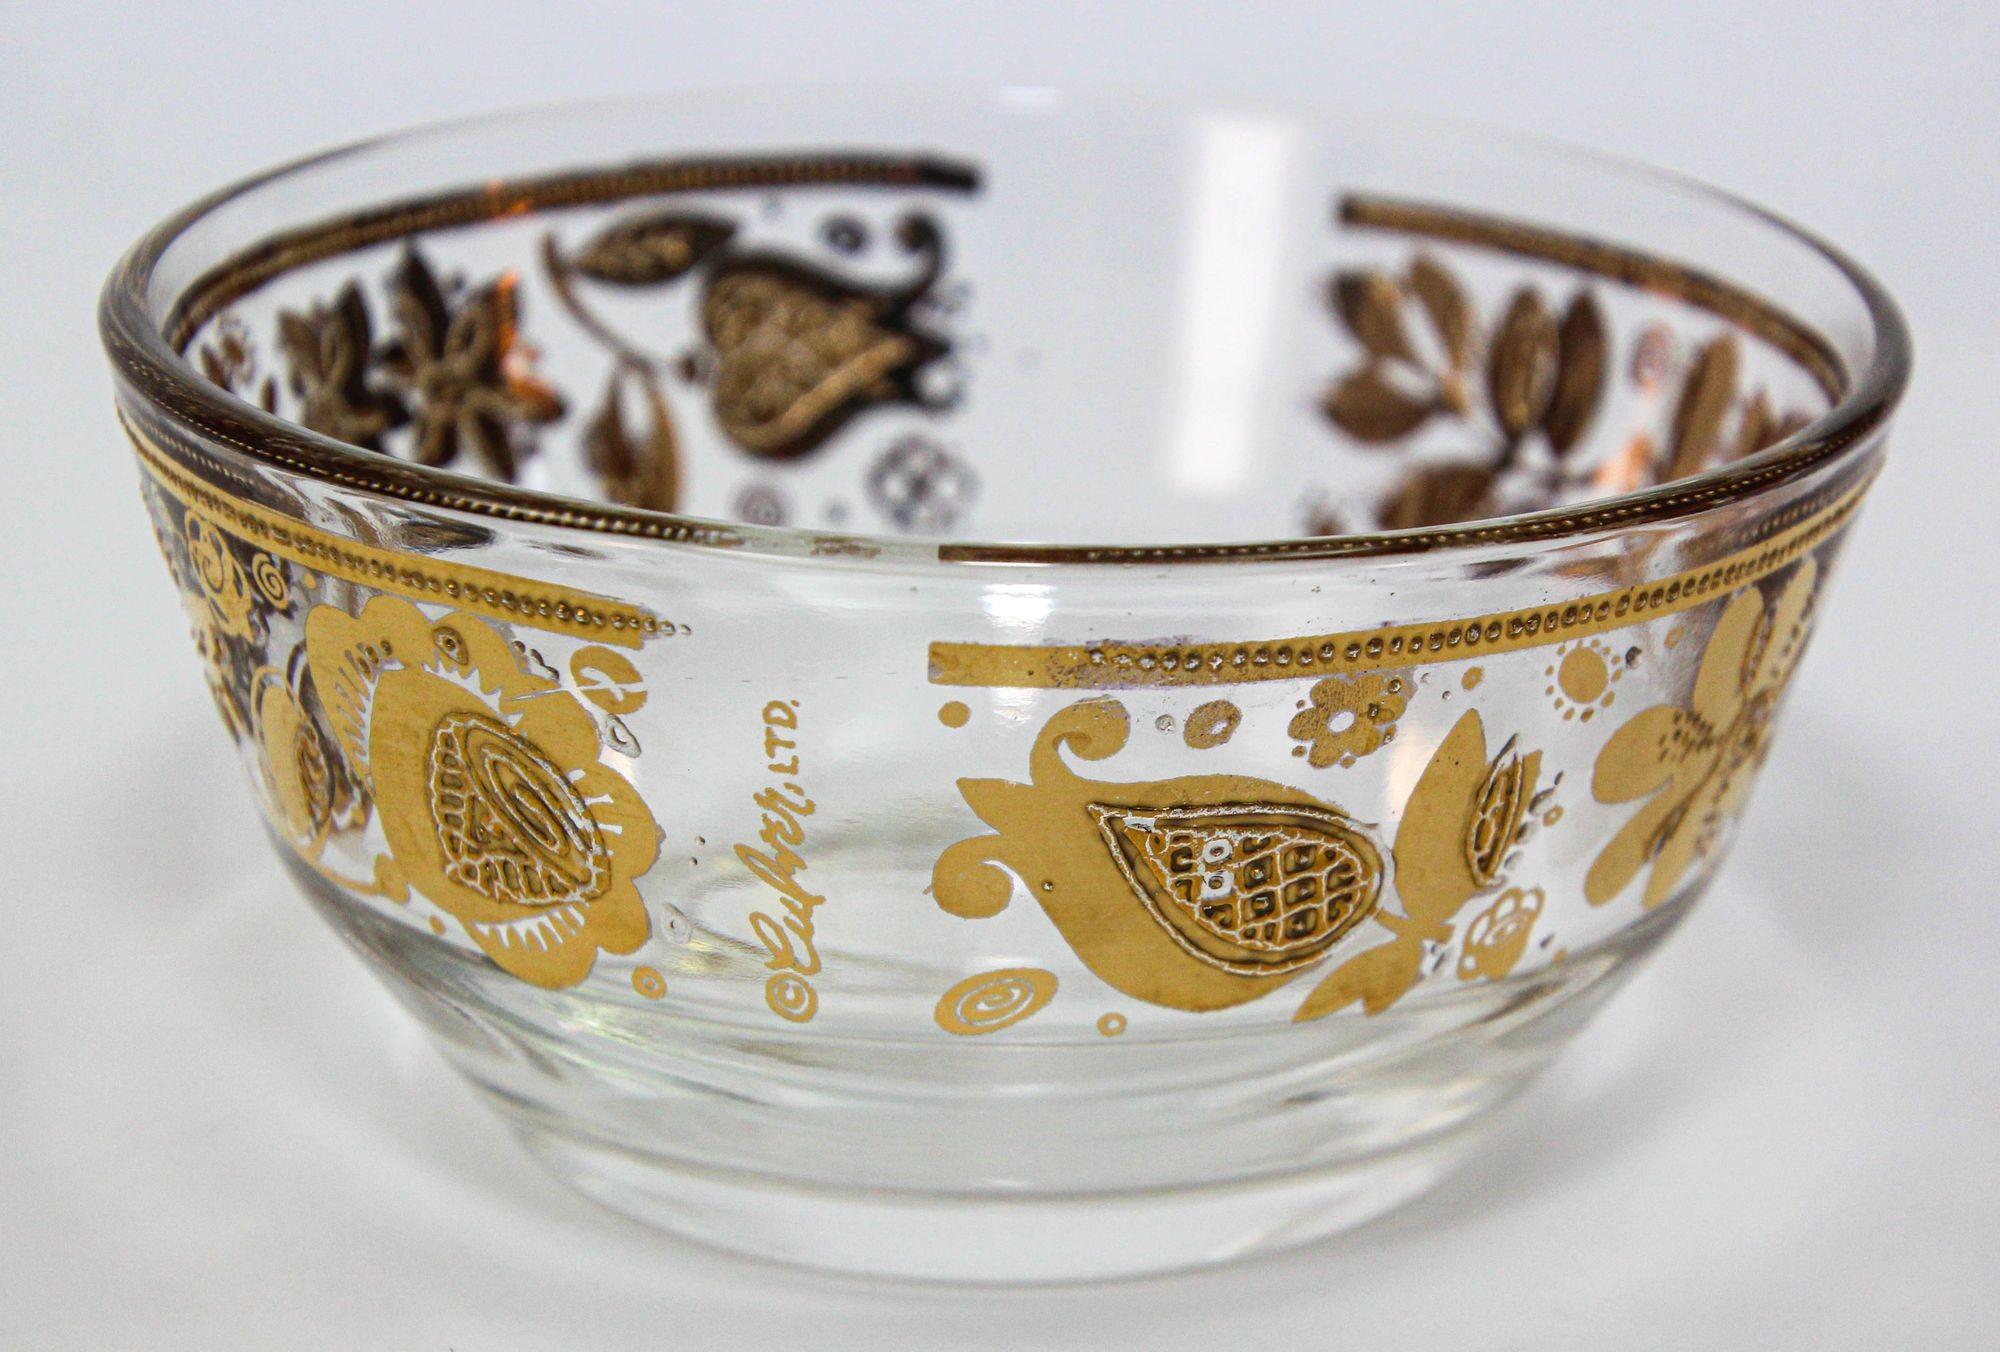 Culver Ltd 1960s Appetizer Bowls 22K Gold Leaf Set of 4 In Good Condition For Sale In North Hollywood, CA